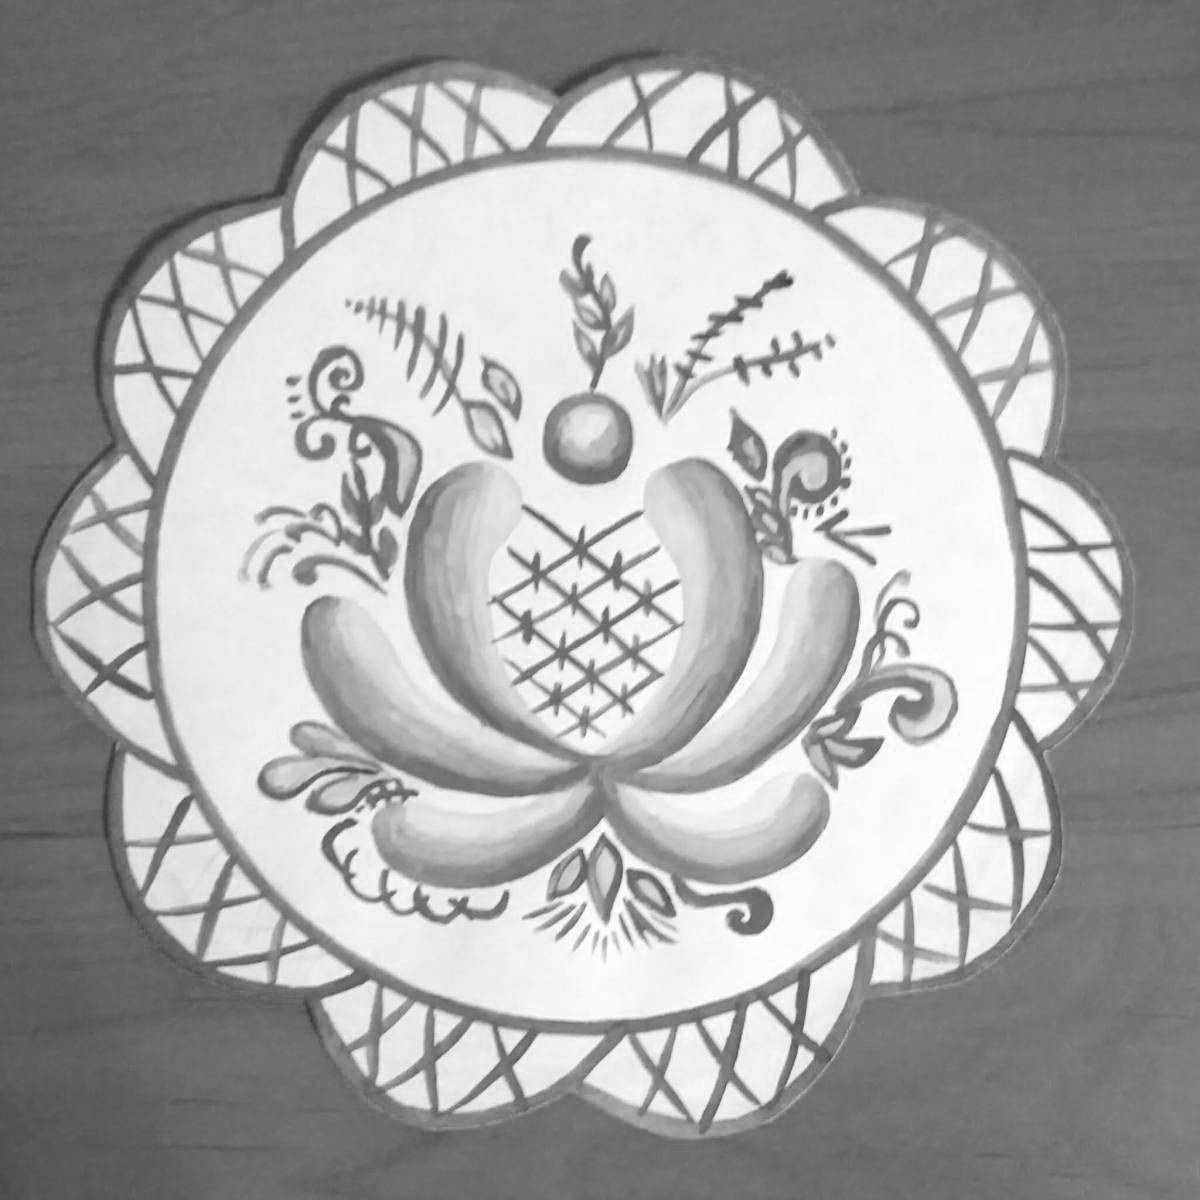 Coloring book playful Gzhel plate